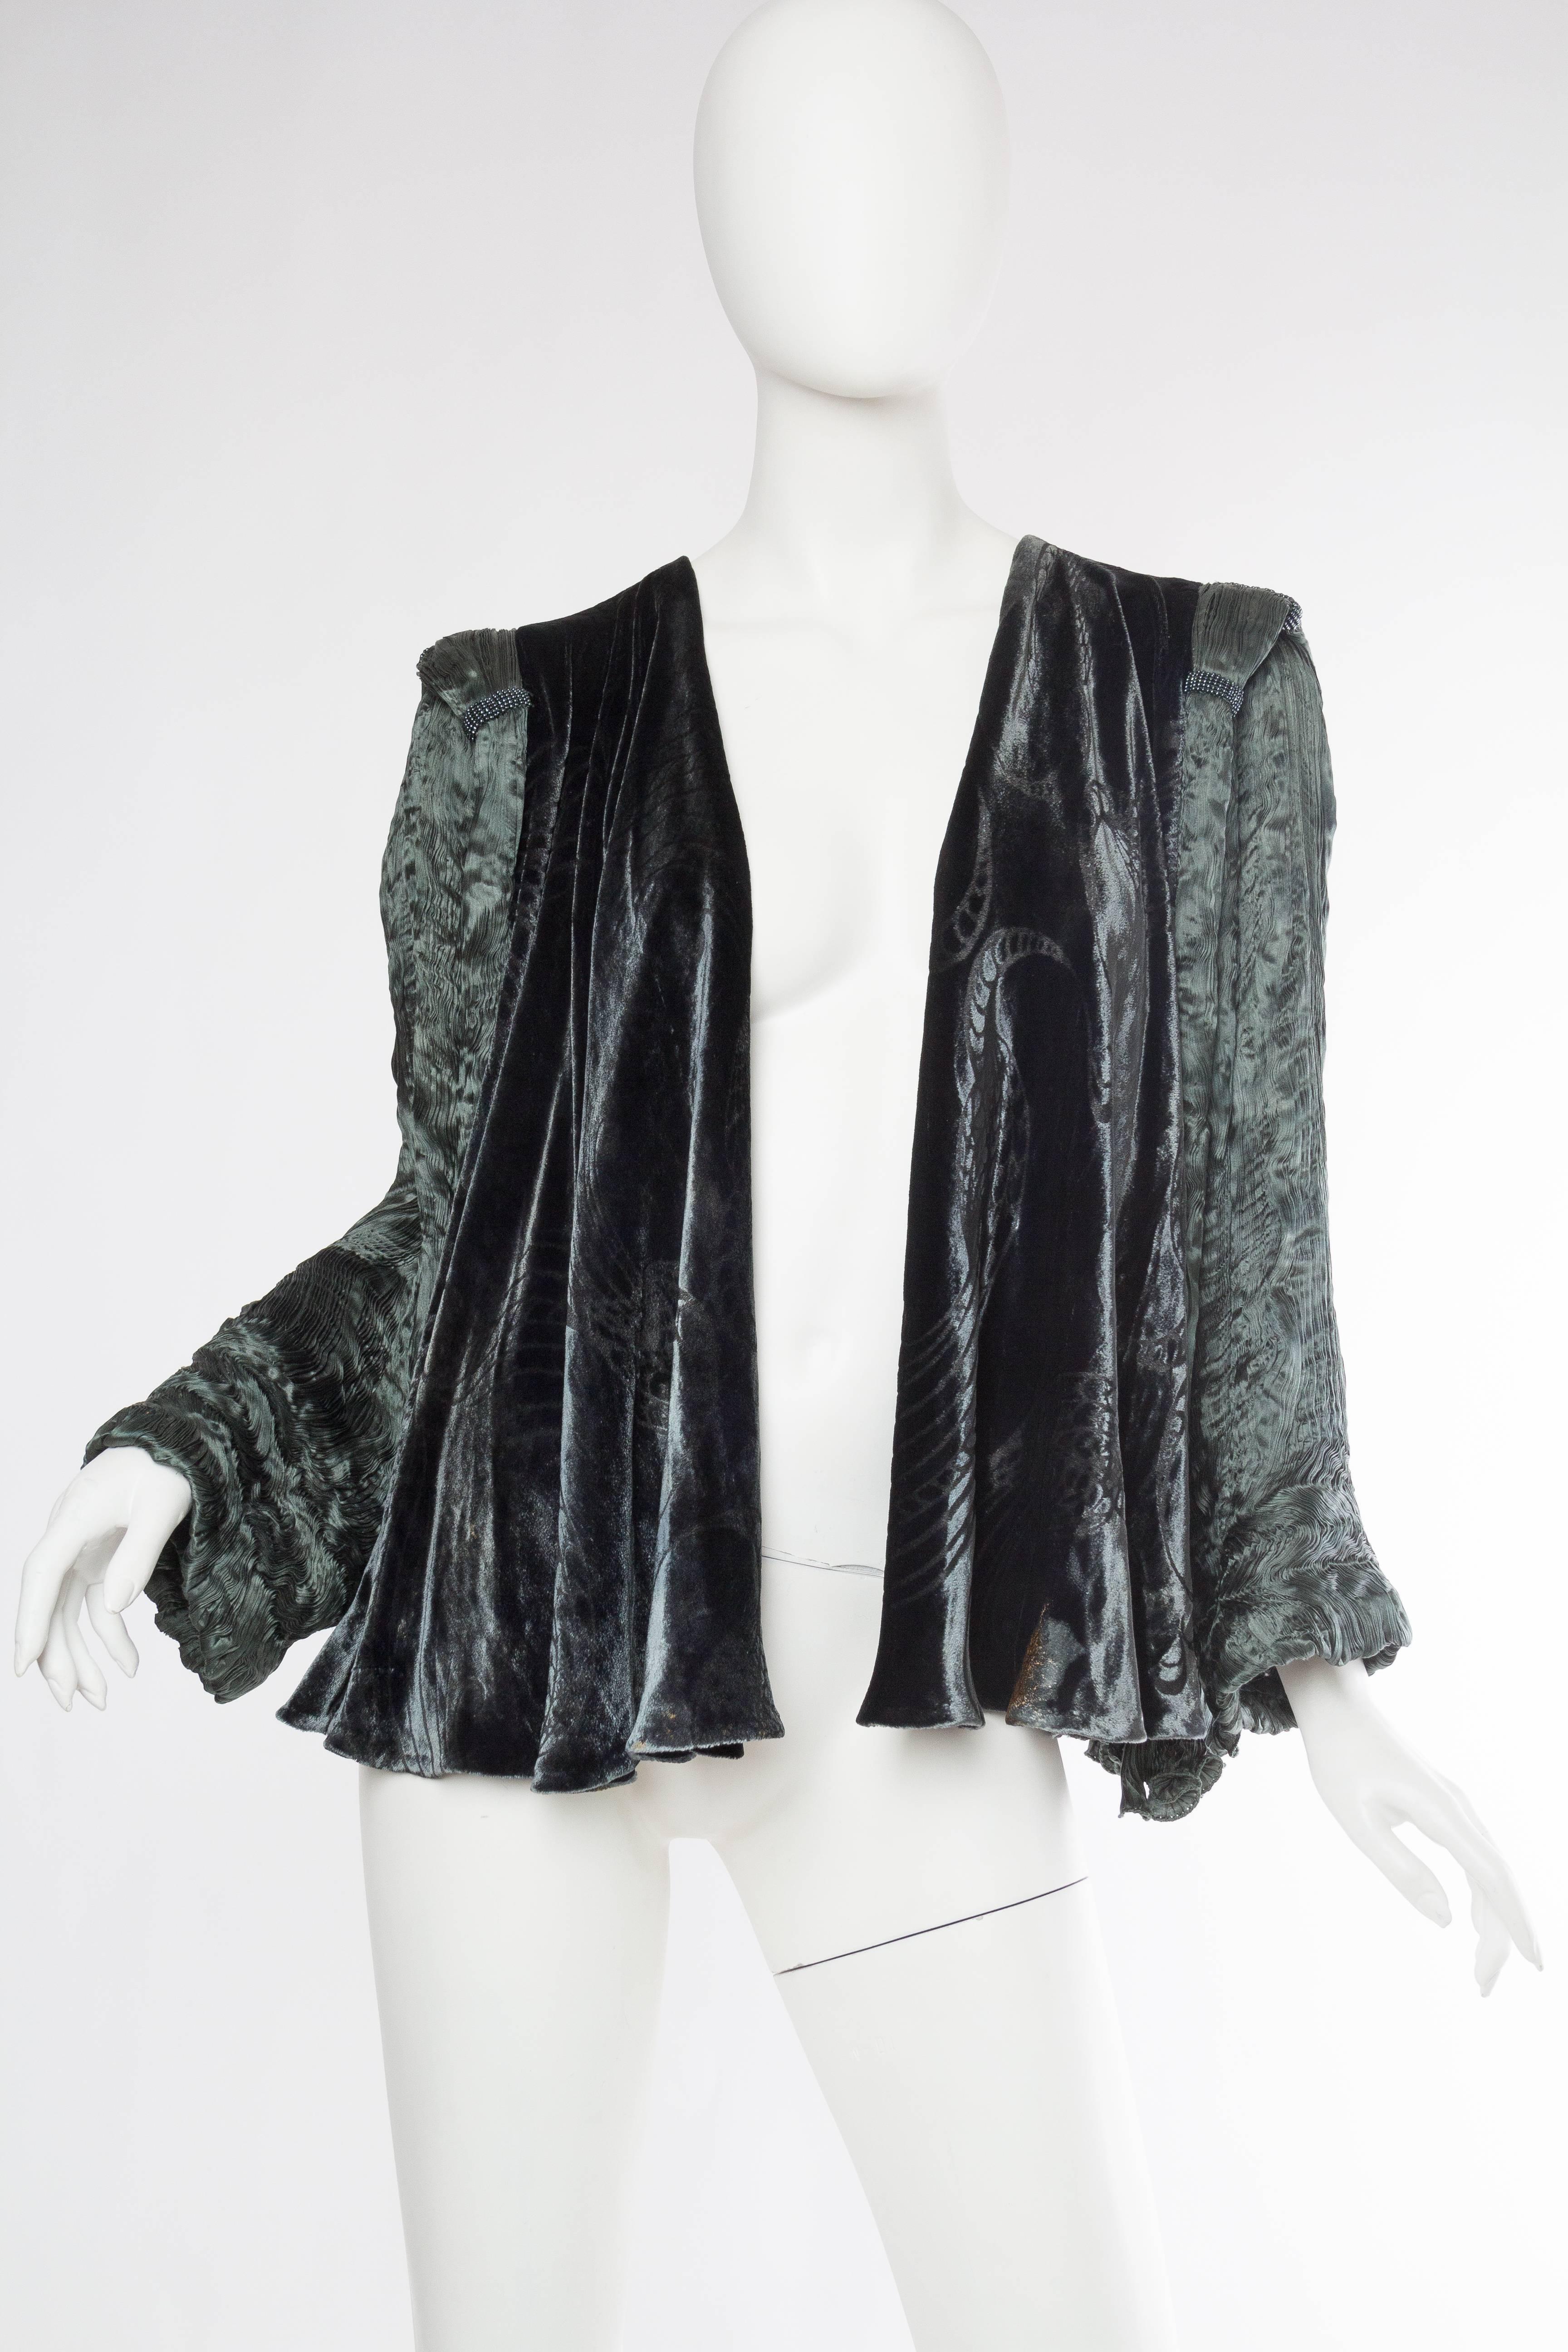 1990S PATRICIA LESTER Dark Green Haute Couture Silk Charmeuse Micro Pleated Beaded Mini Cocktail Dress Set With Velvet Trim Jacket